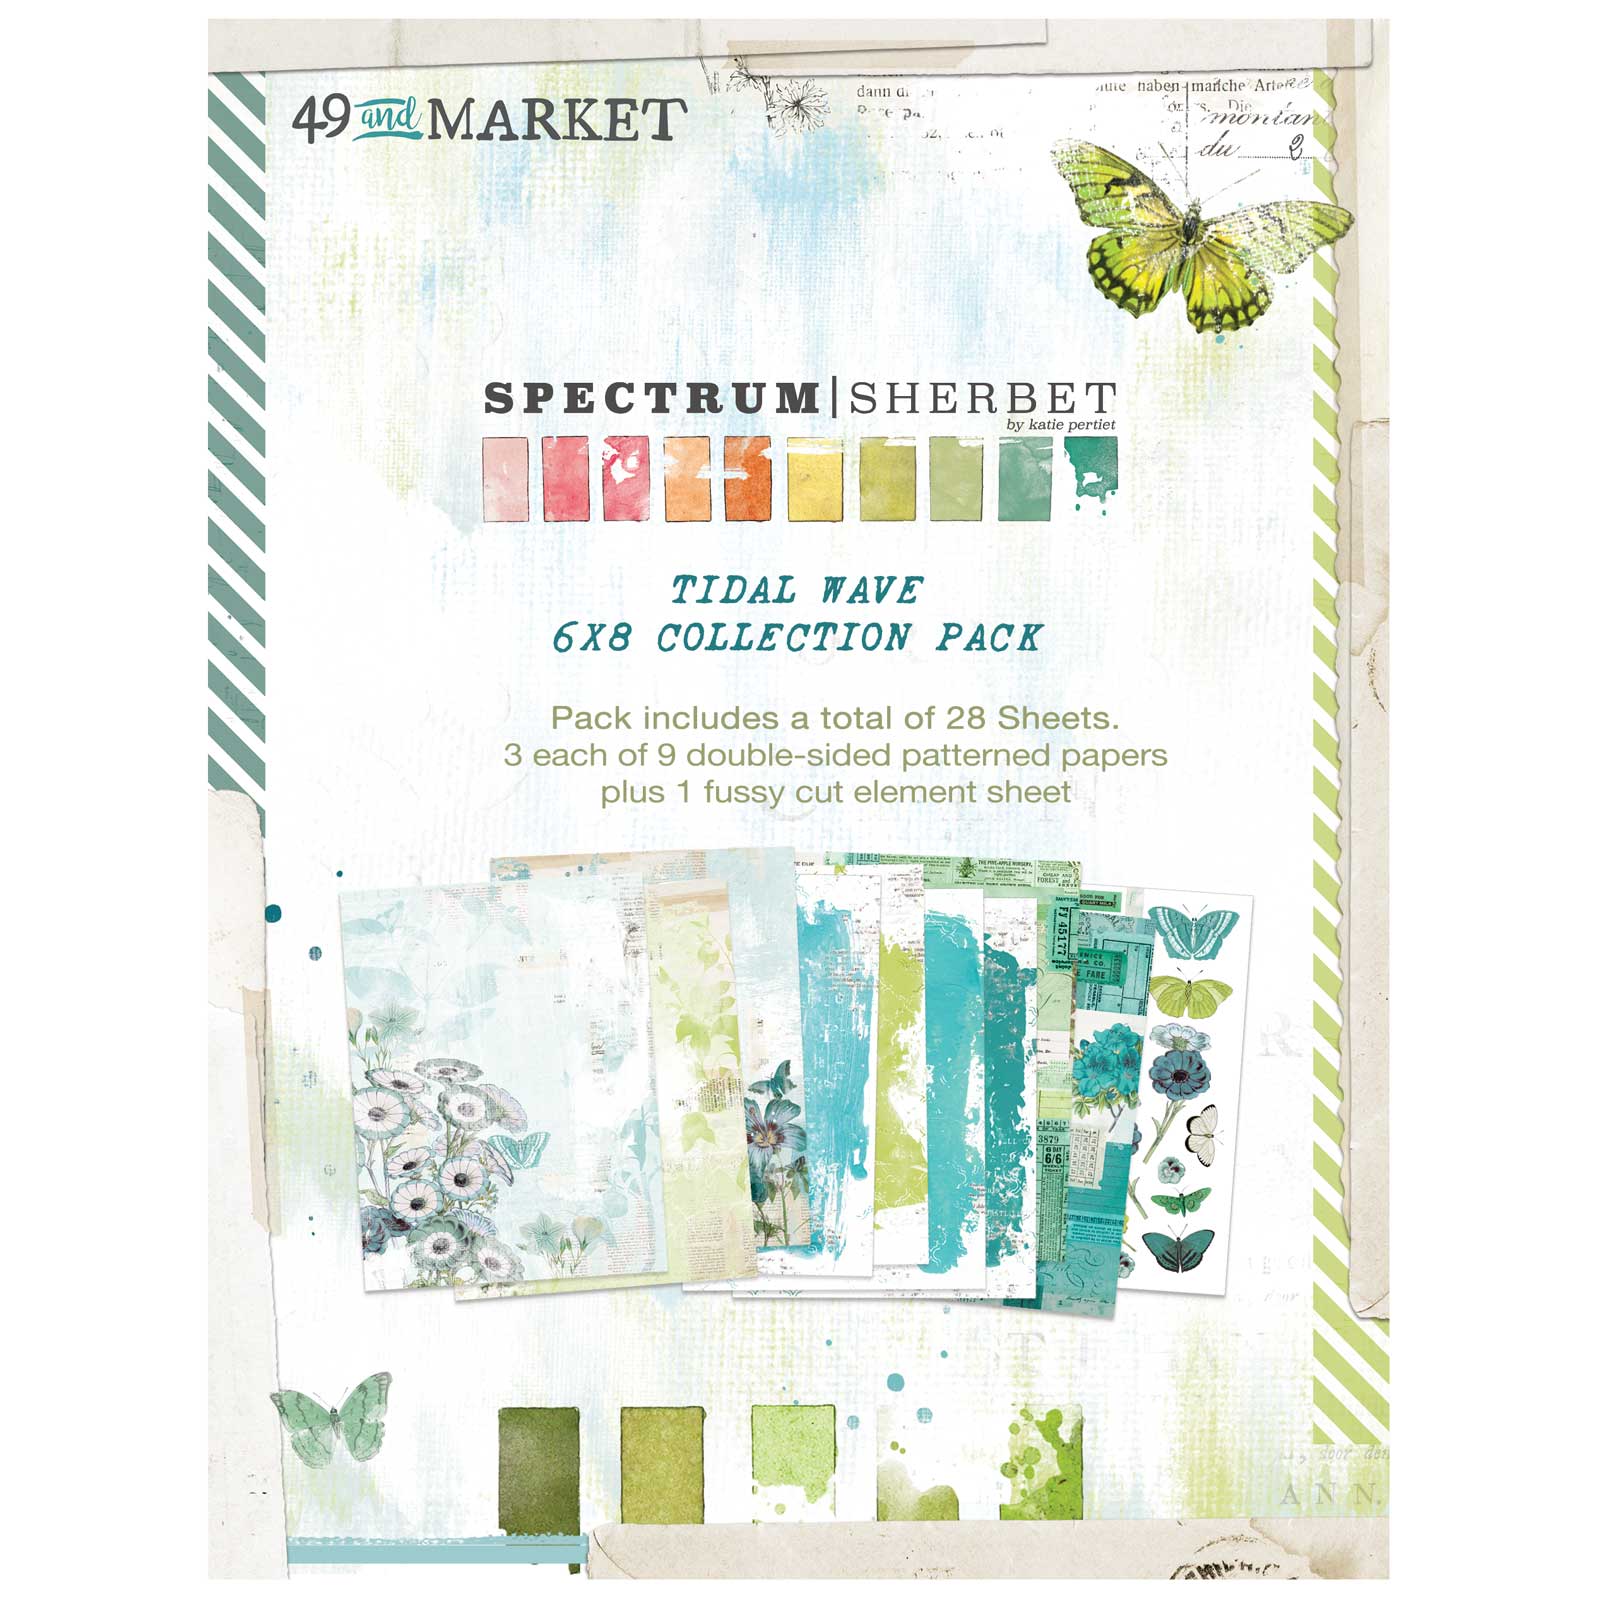 SS-36257-Sherbet-Tidal-Wave-6x8-Collection-Pack-1   49 and Market  Katie Pertier